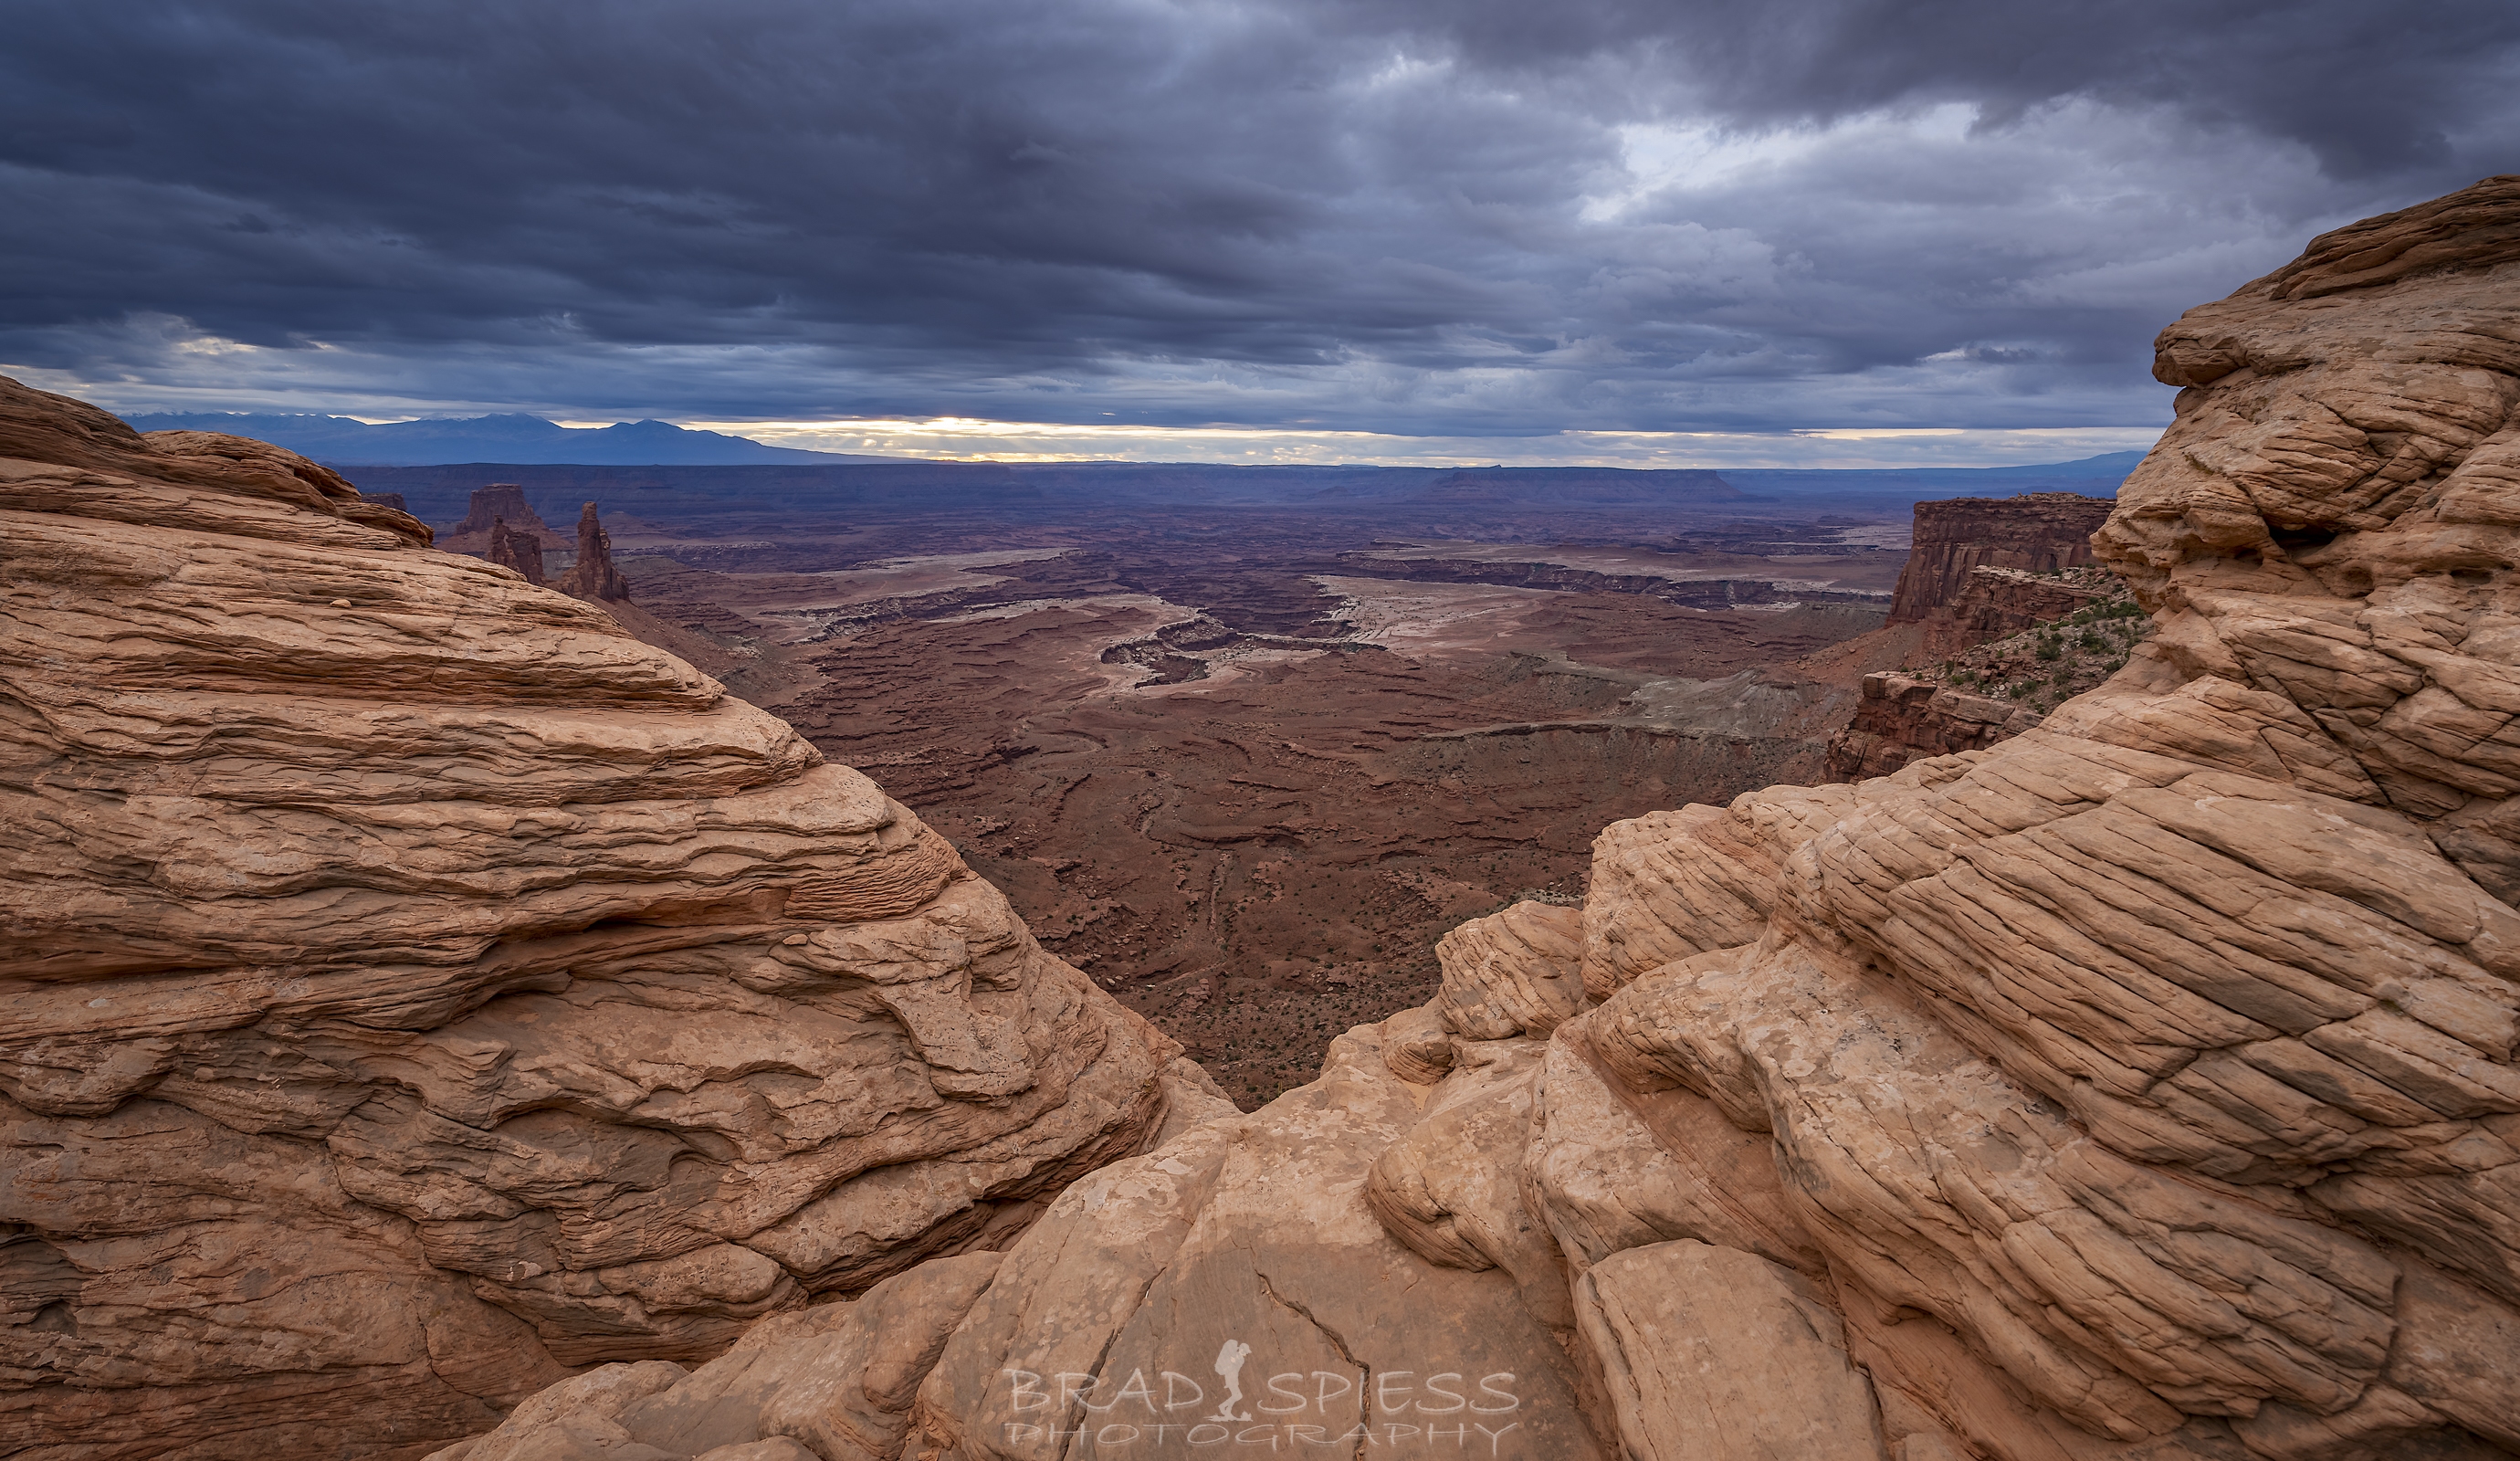 An area to the right of Mesa Arch gives a great glimpse of the canyons below.